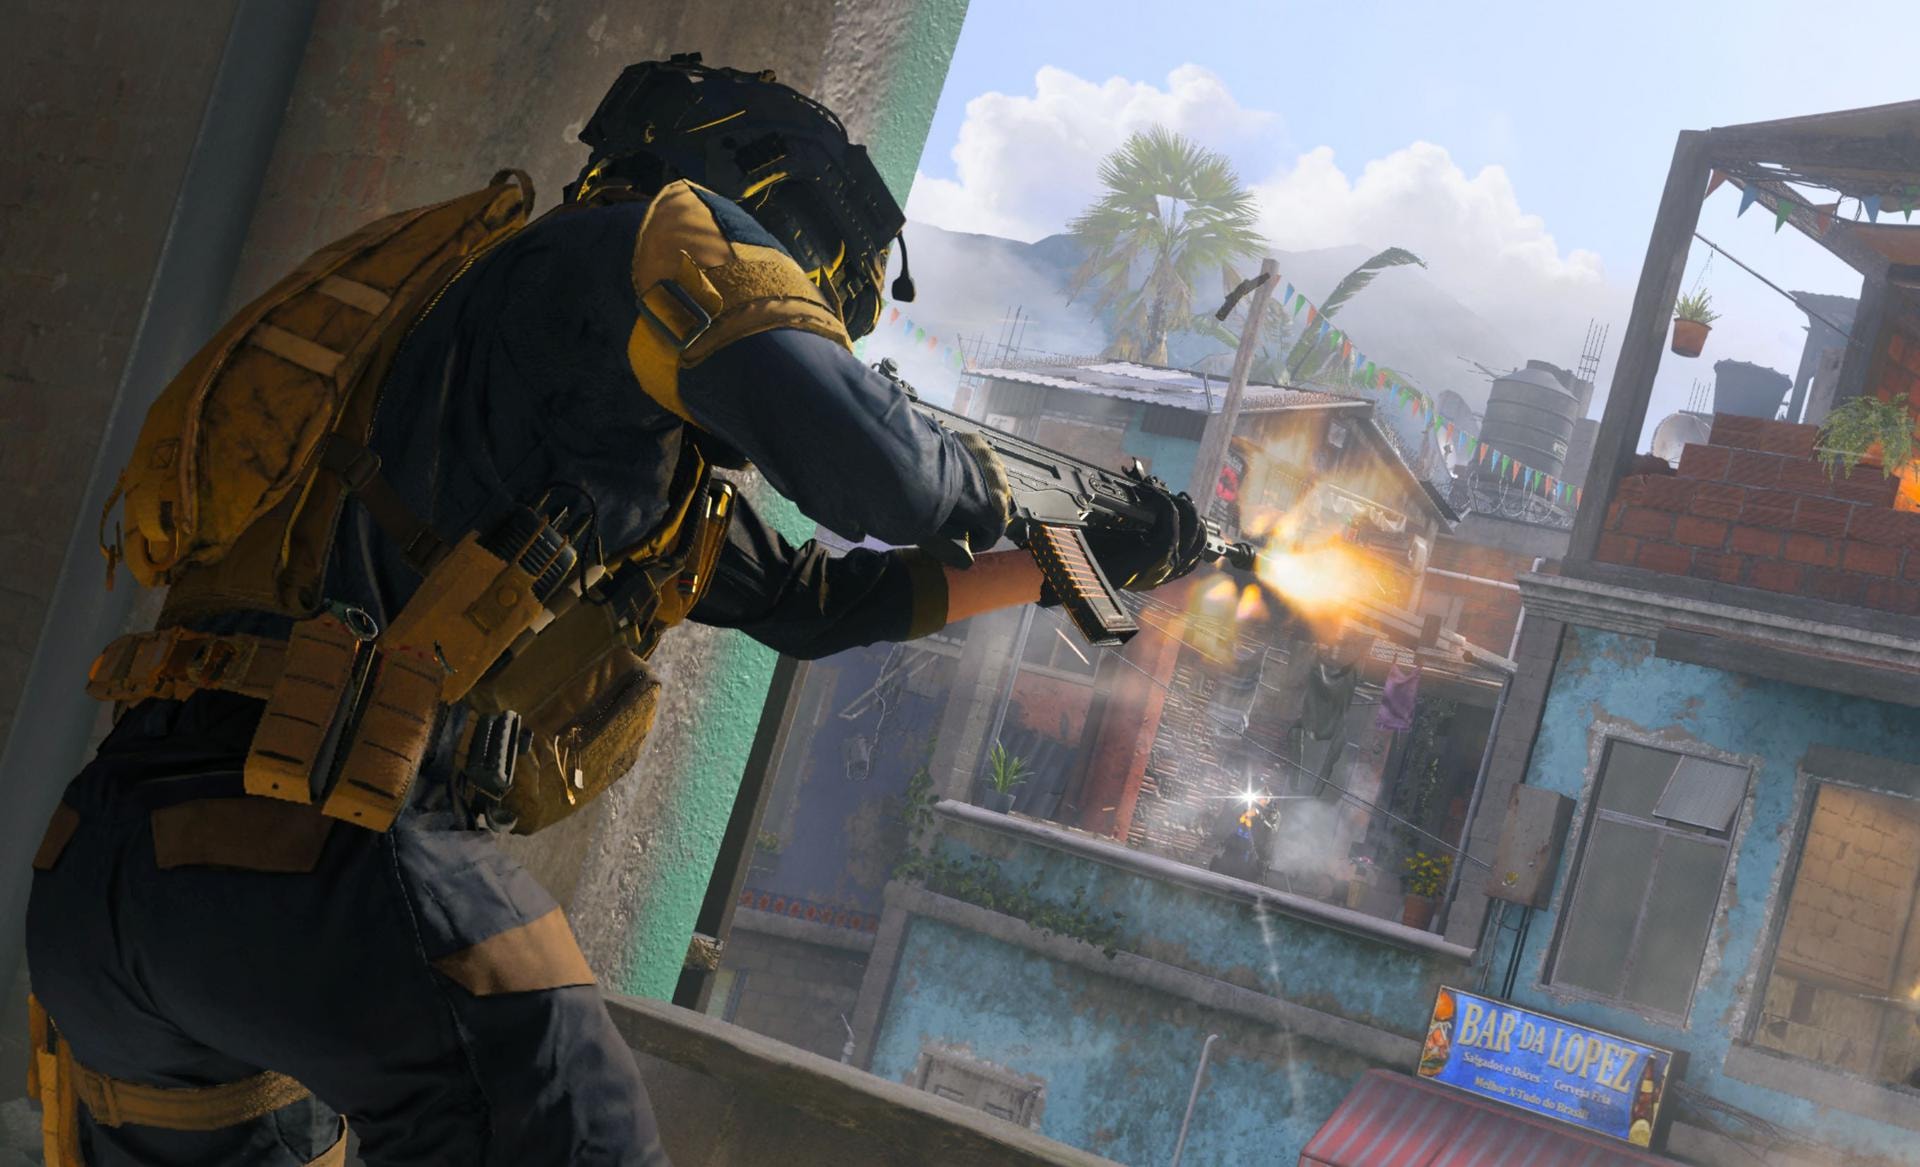 cod-modern-warfare-3-details-how-mw2-camos-work-plus-first-look-at-beautiful-mastery-camos